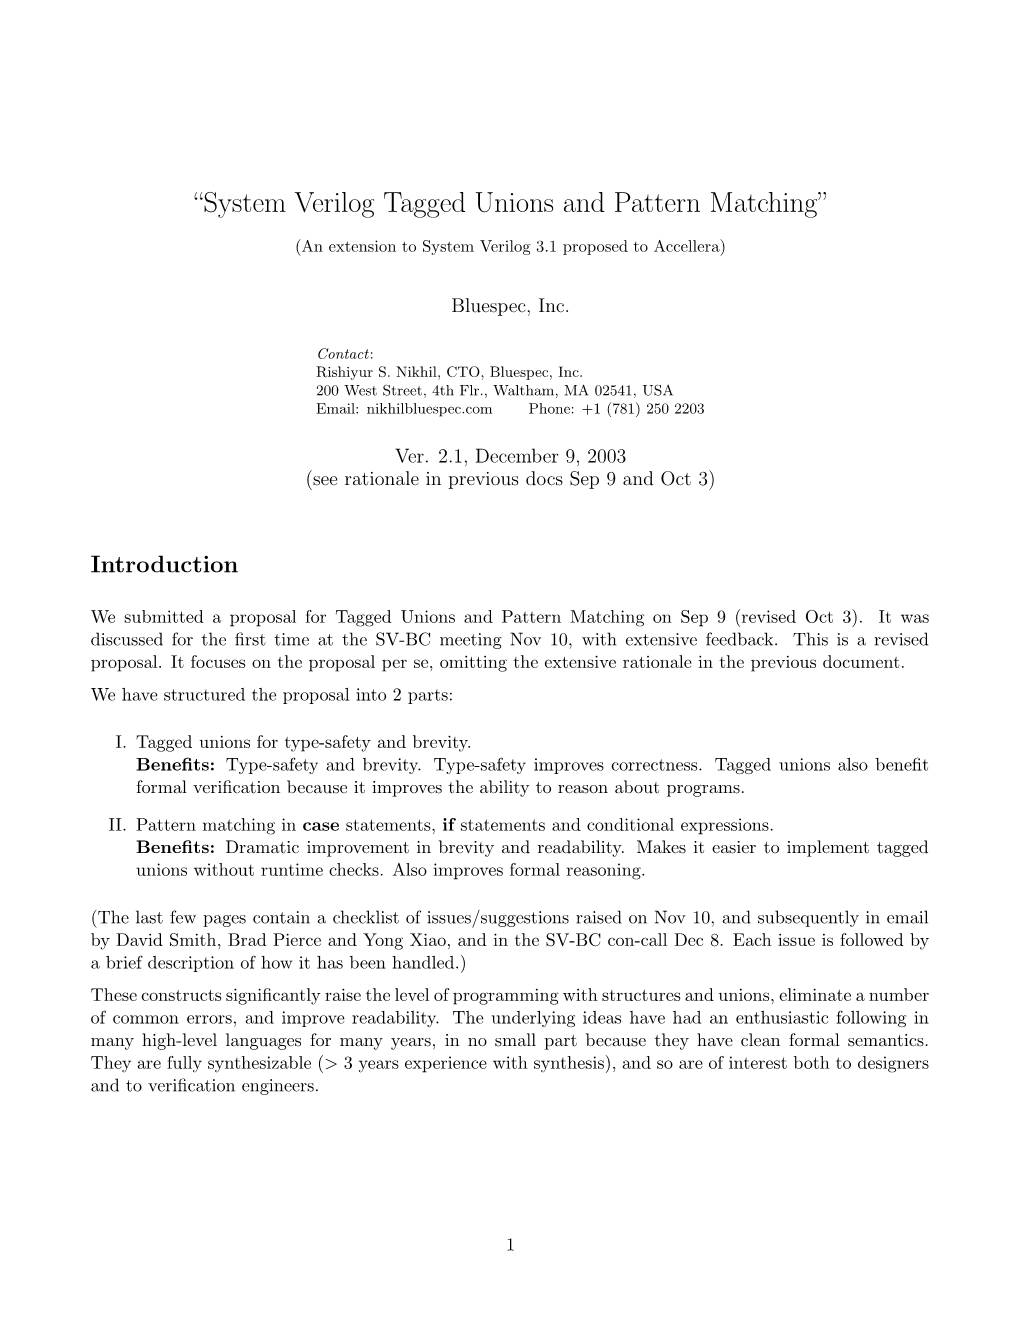 “System Verilog Tagged Unions and Pattern Matching”